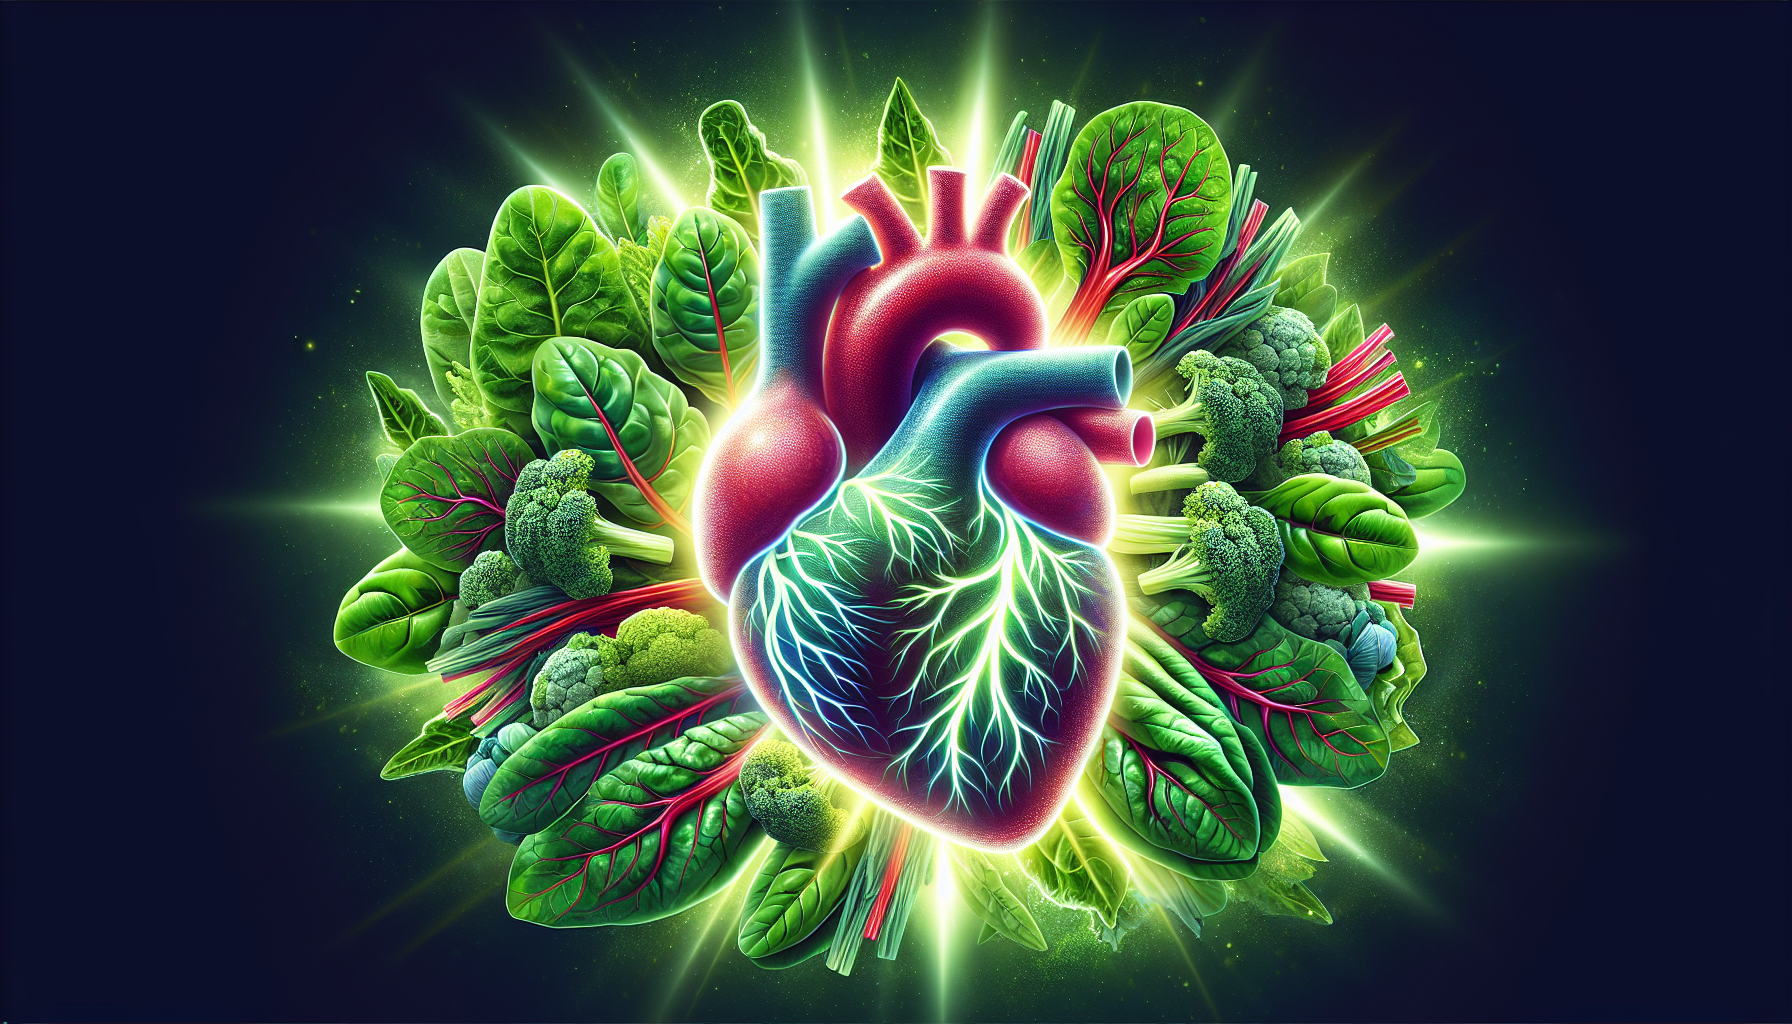 Illustration of a healthy heart and green leafy vegetables